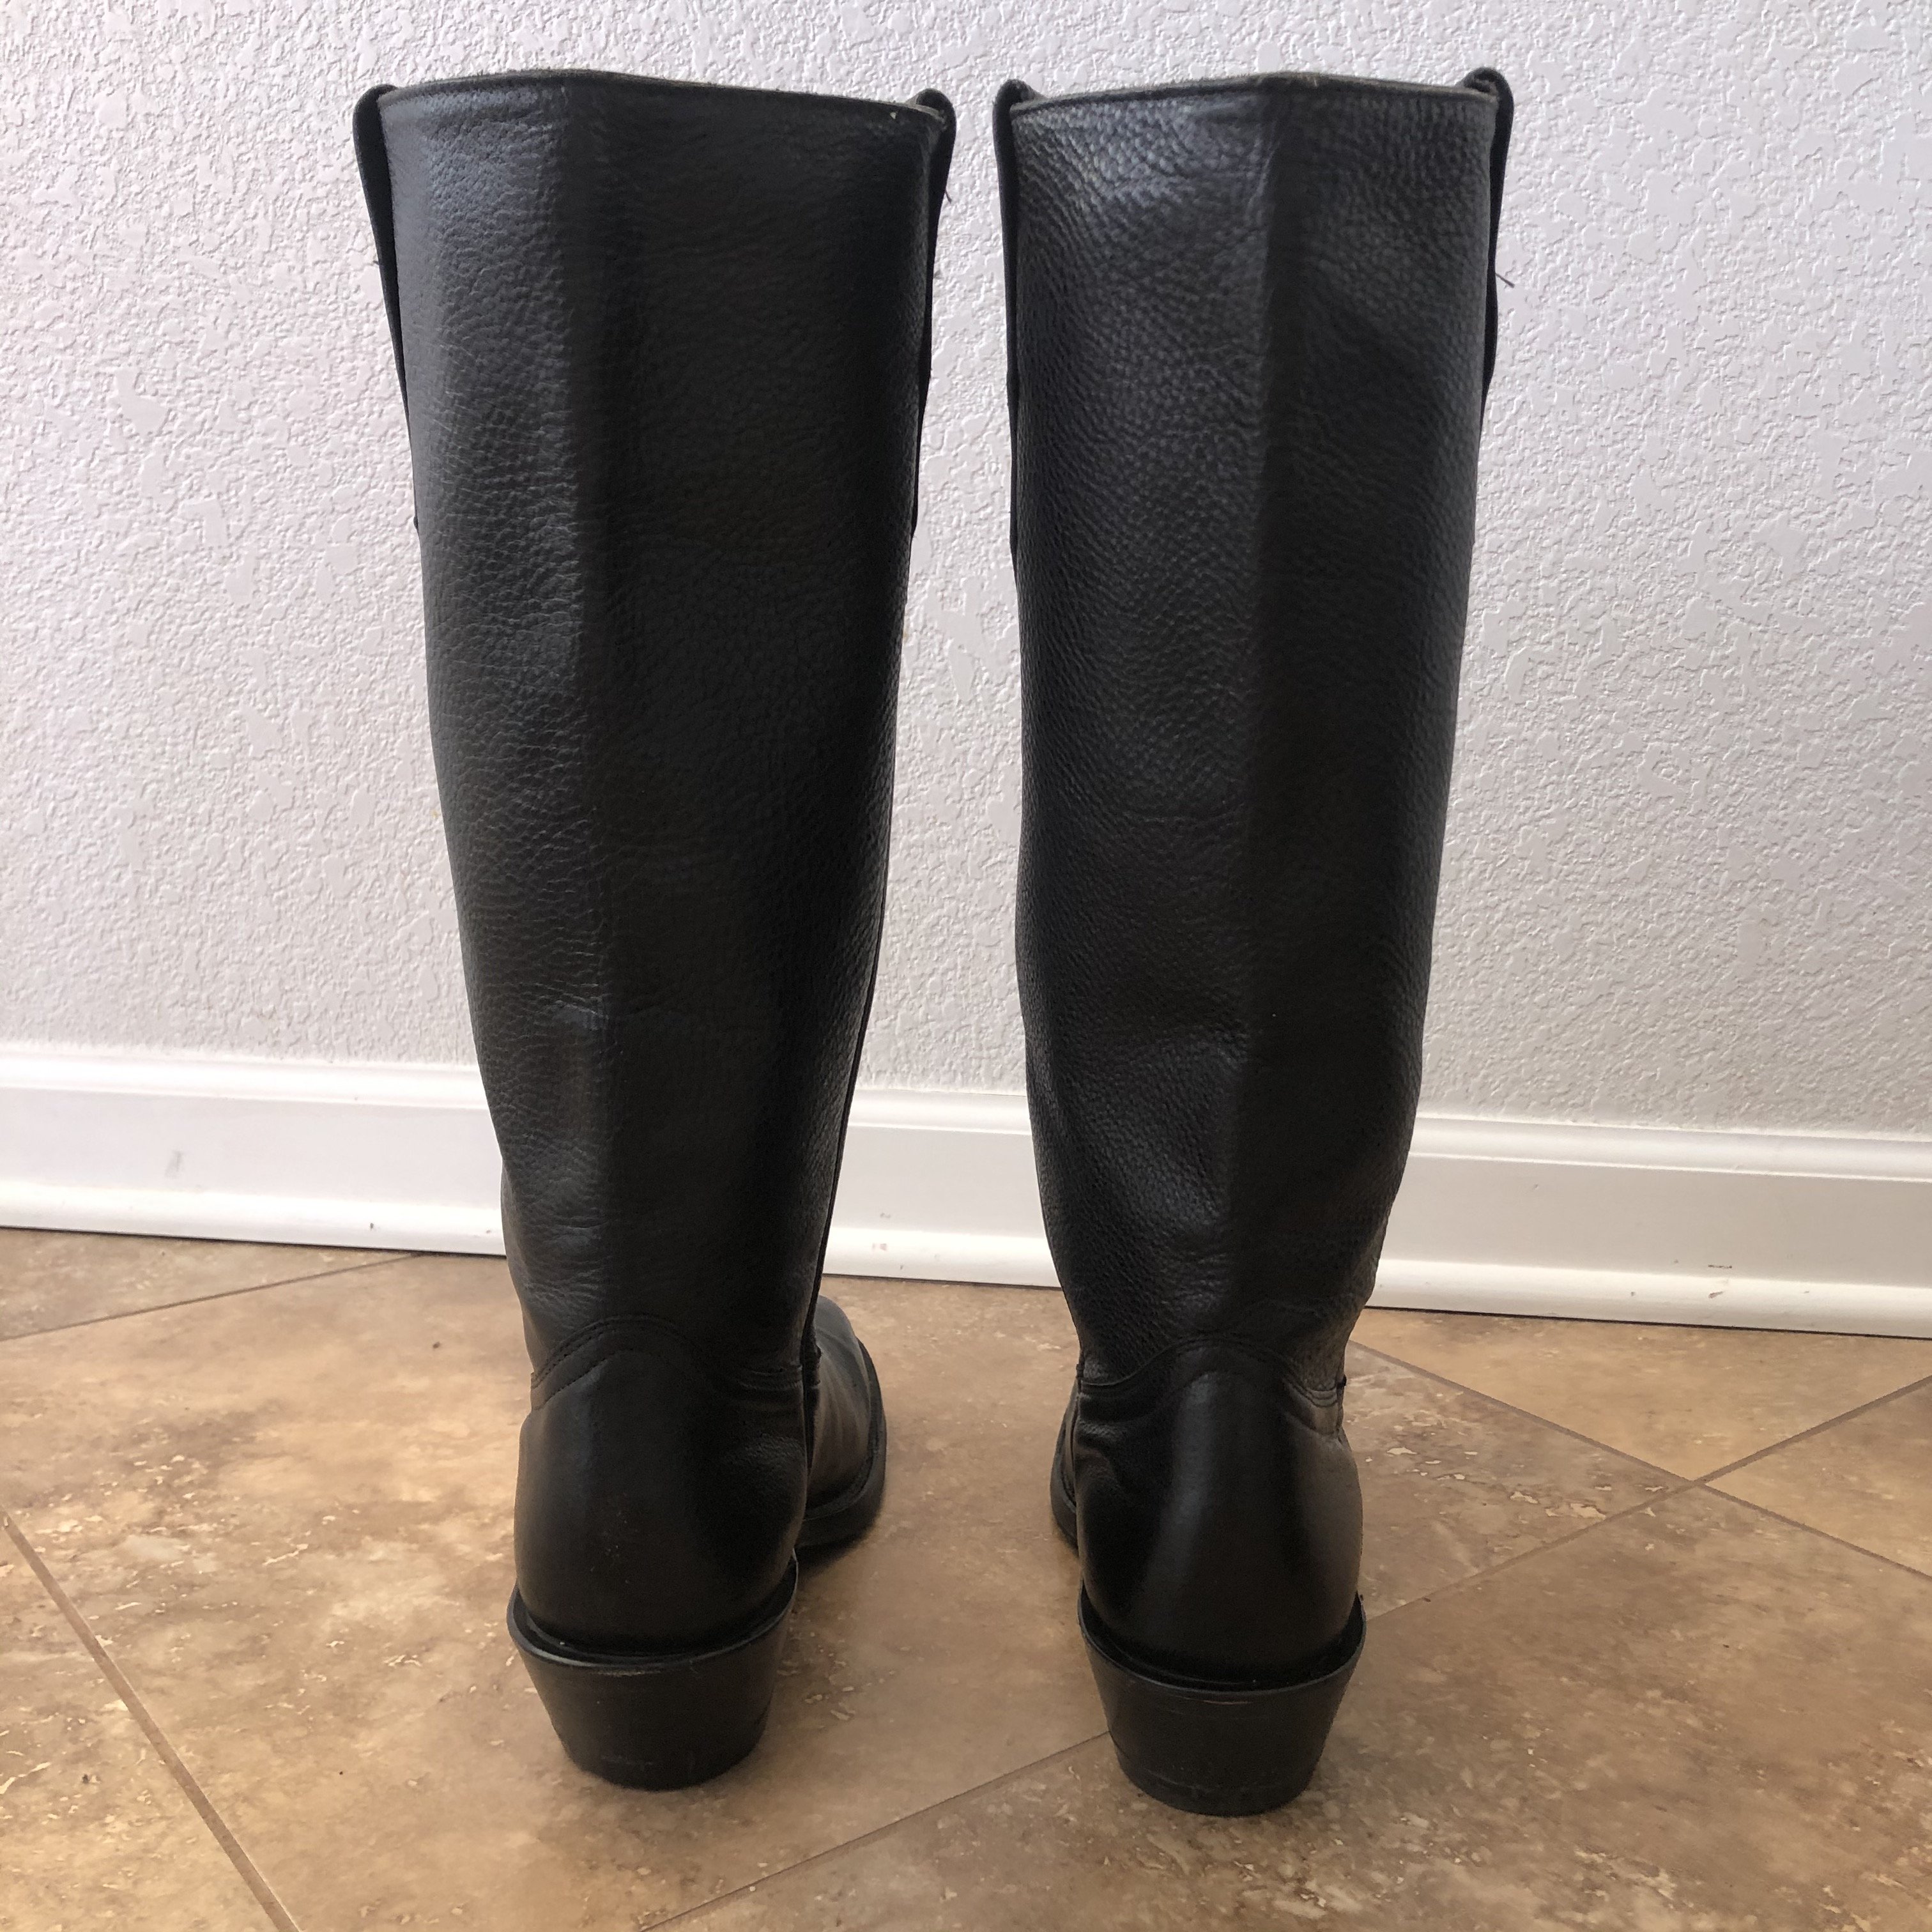 (FS) Boulet Boots - SASS Wire Classifieds - SASS Wire Forum